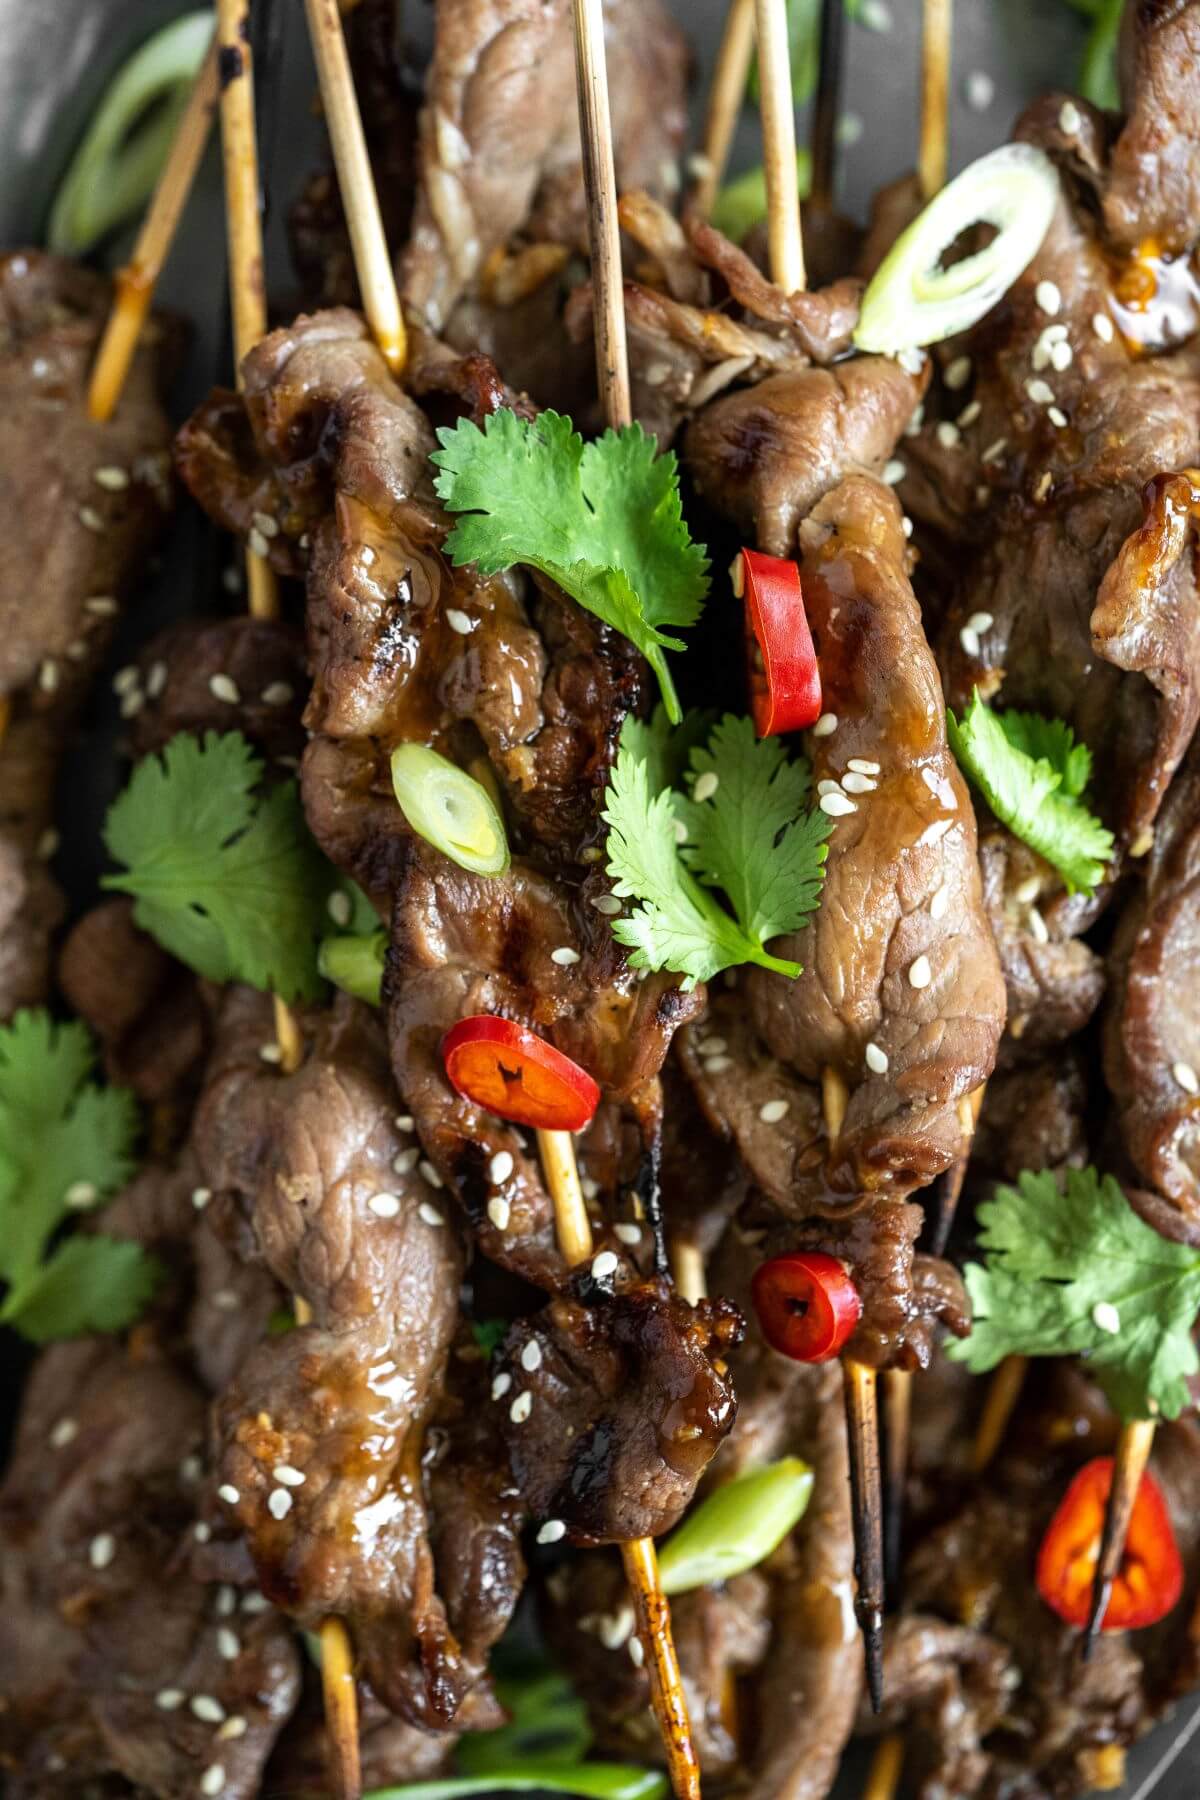 Grilled Teriyaki Beef Sticks garnished with chopped green herbs and red hot peppers.